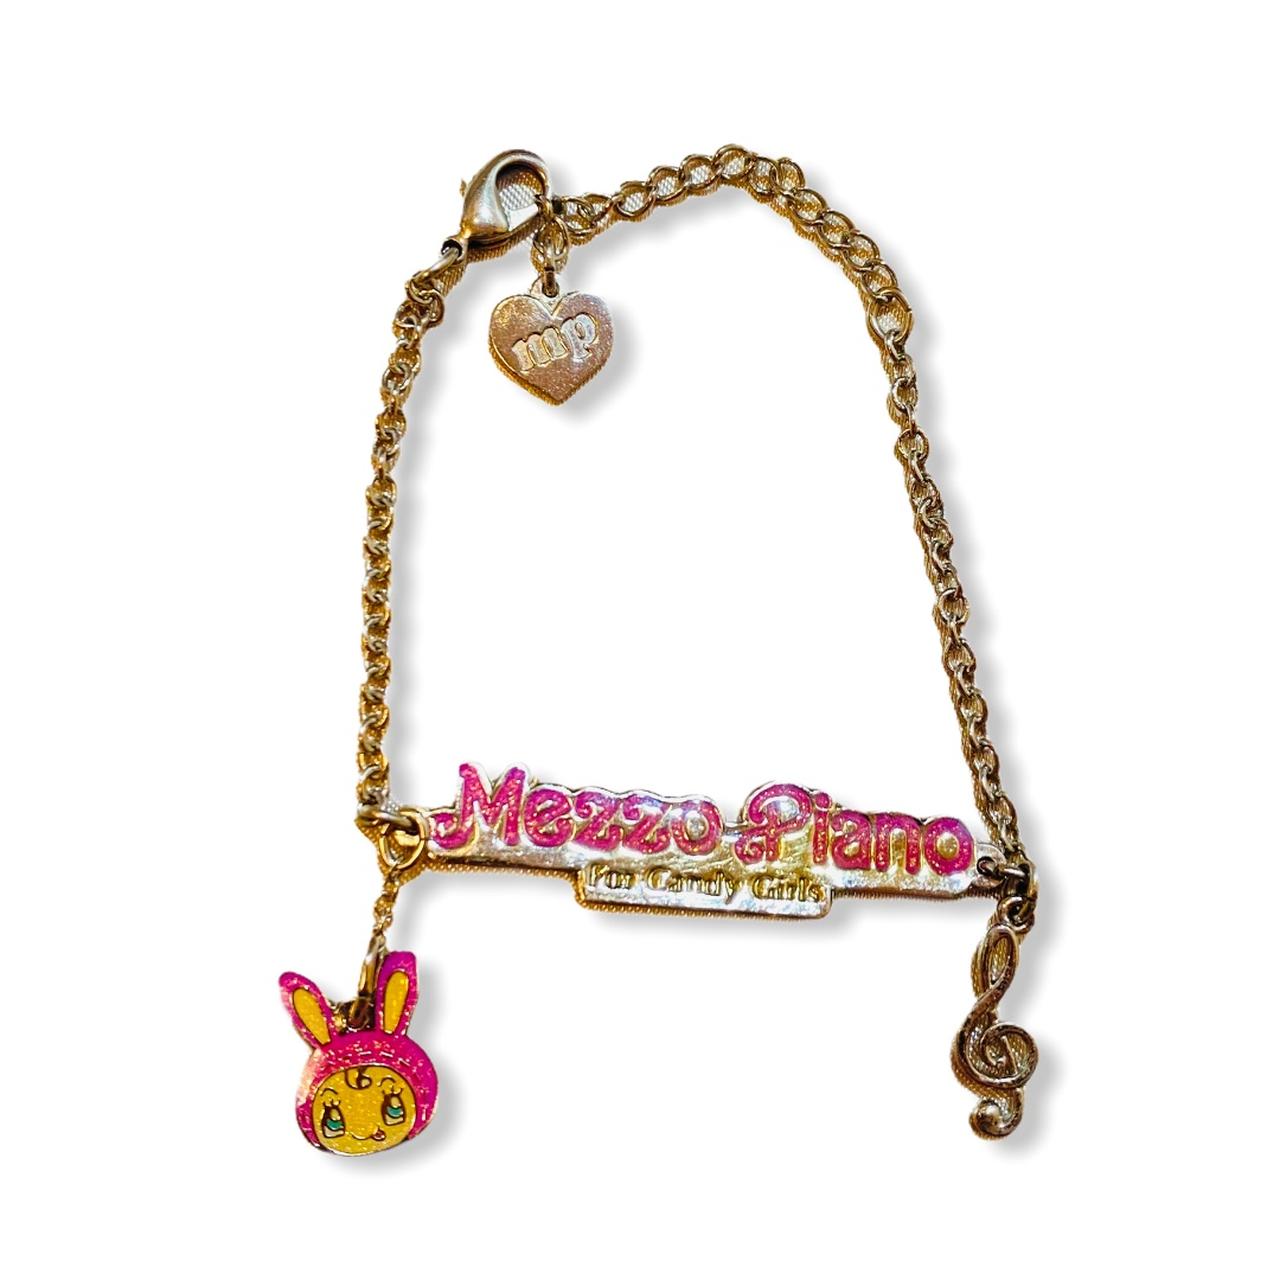 Mezzo Piano Bracelet This Item Is Shipped From Depop